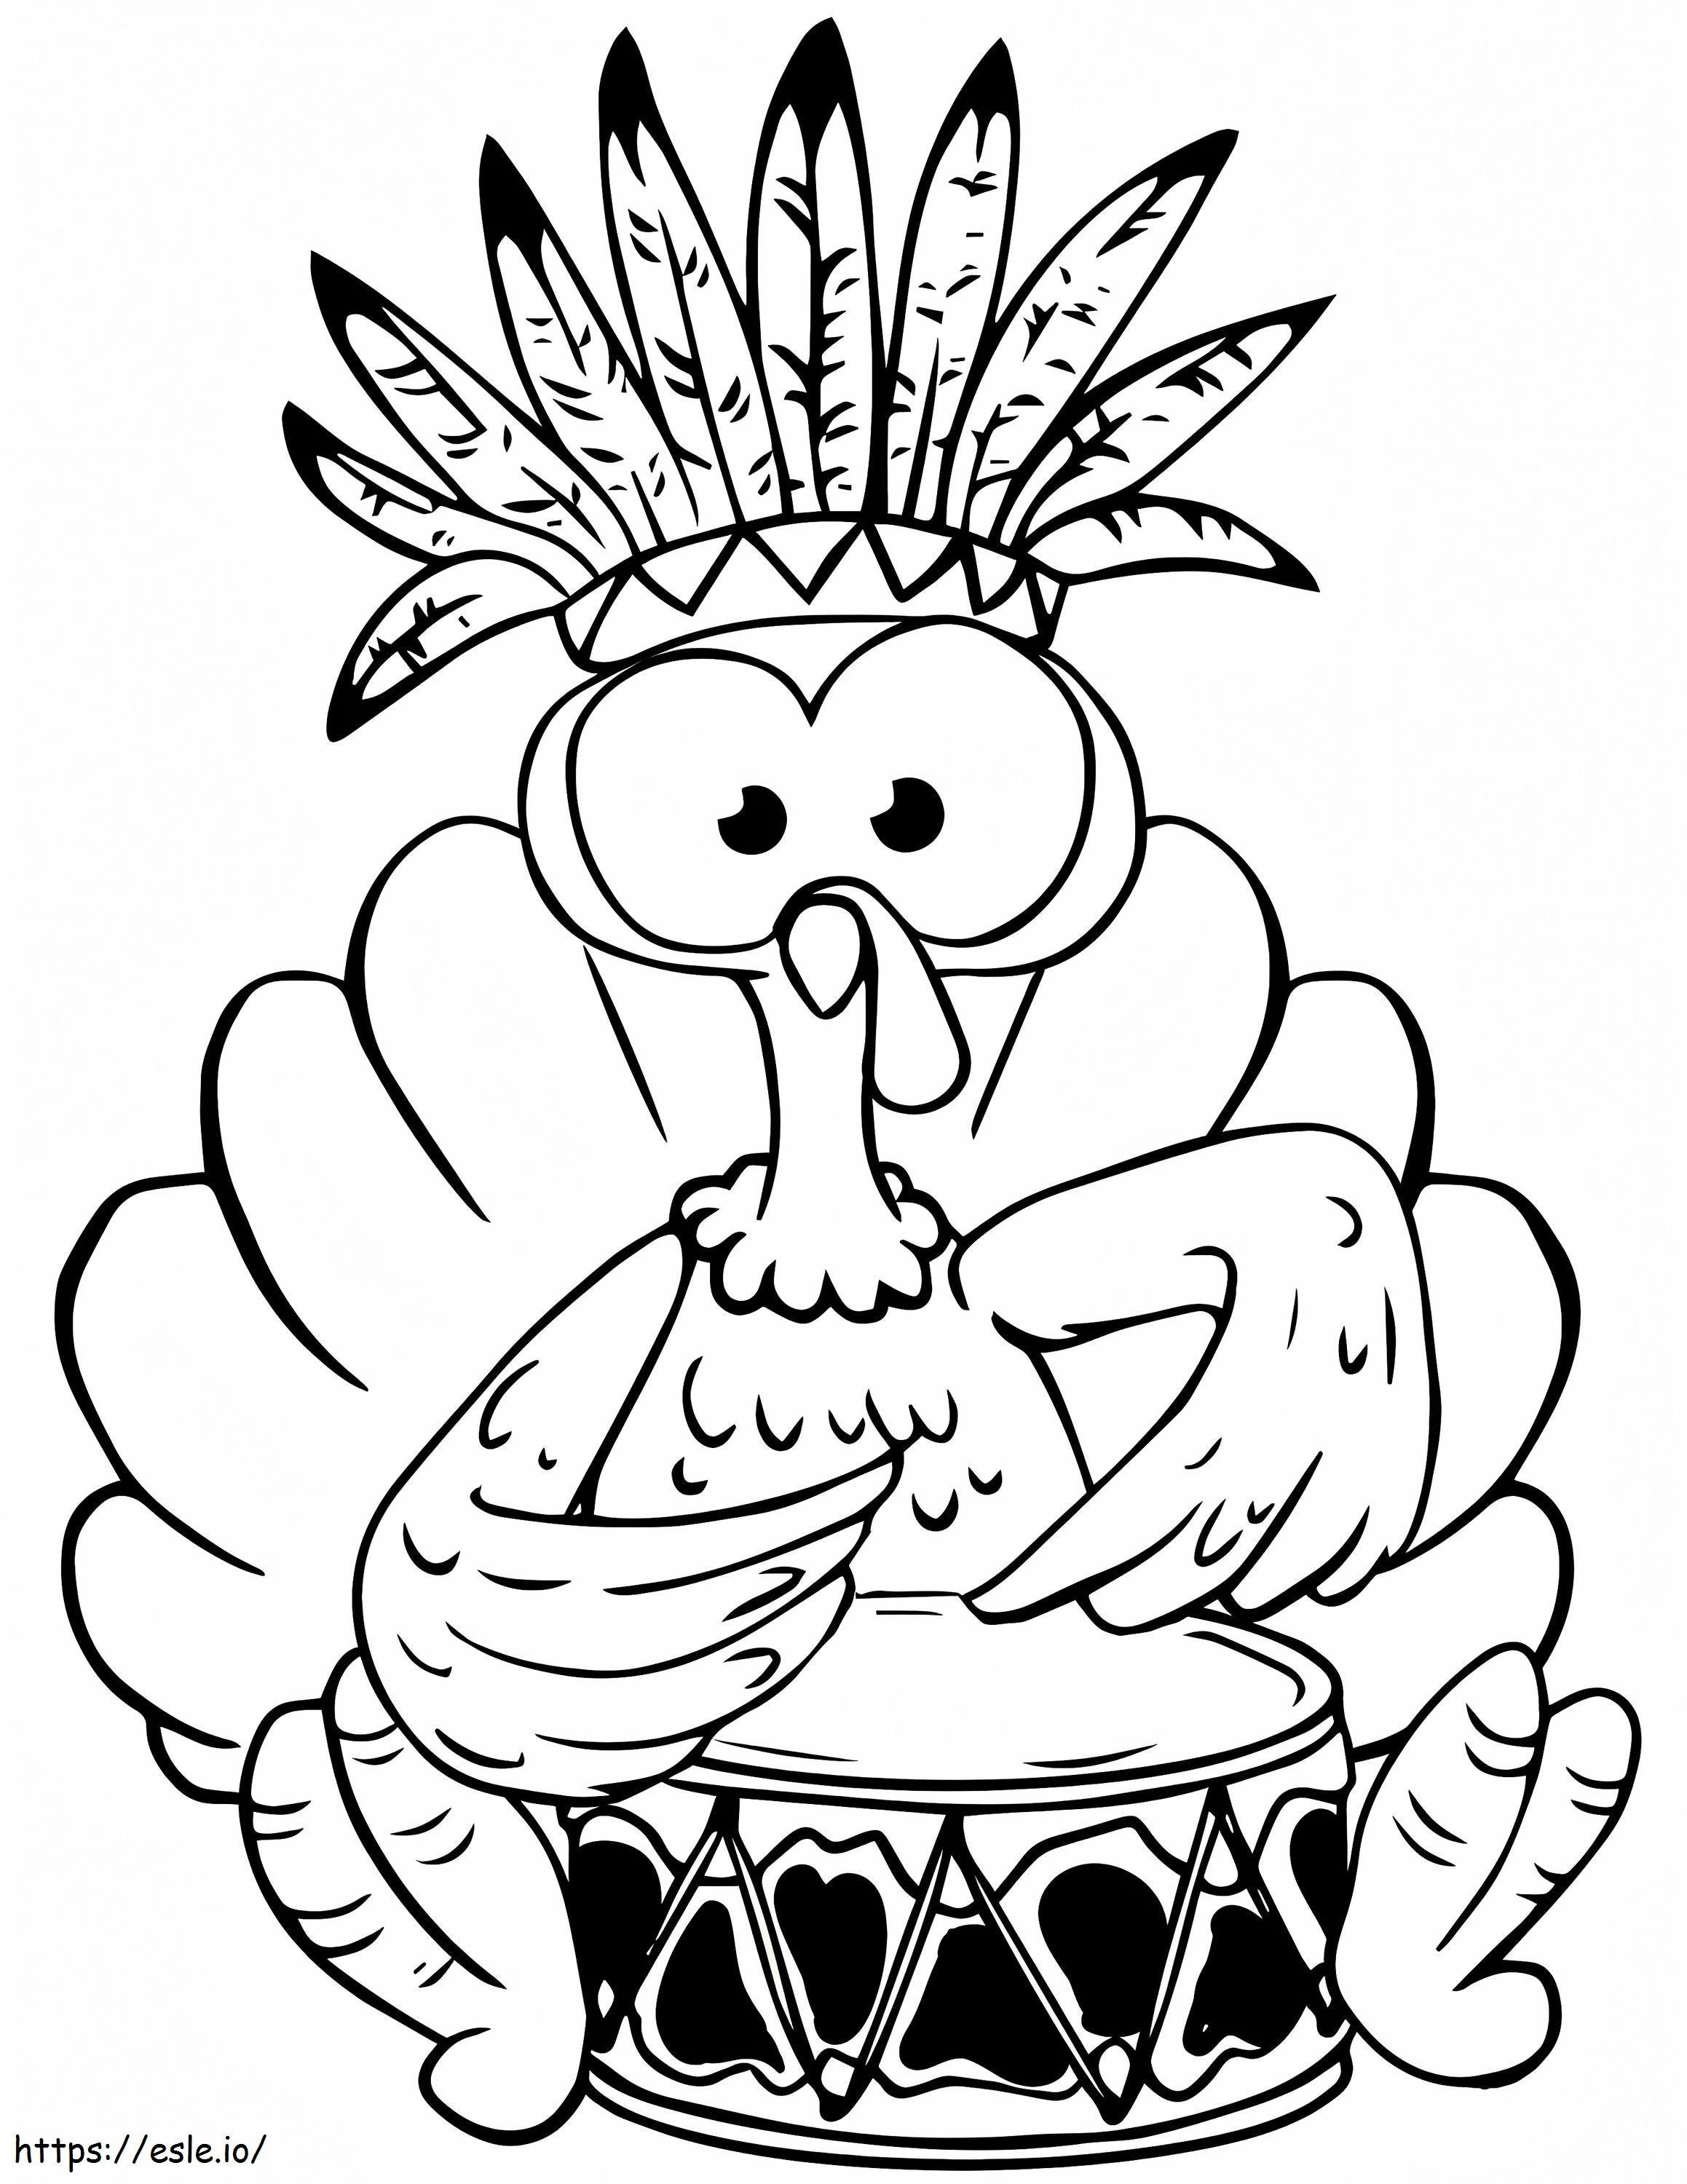 1588061224 Cute Turkey With Drum coloring page